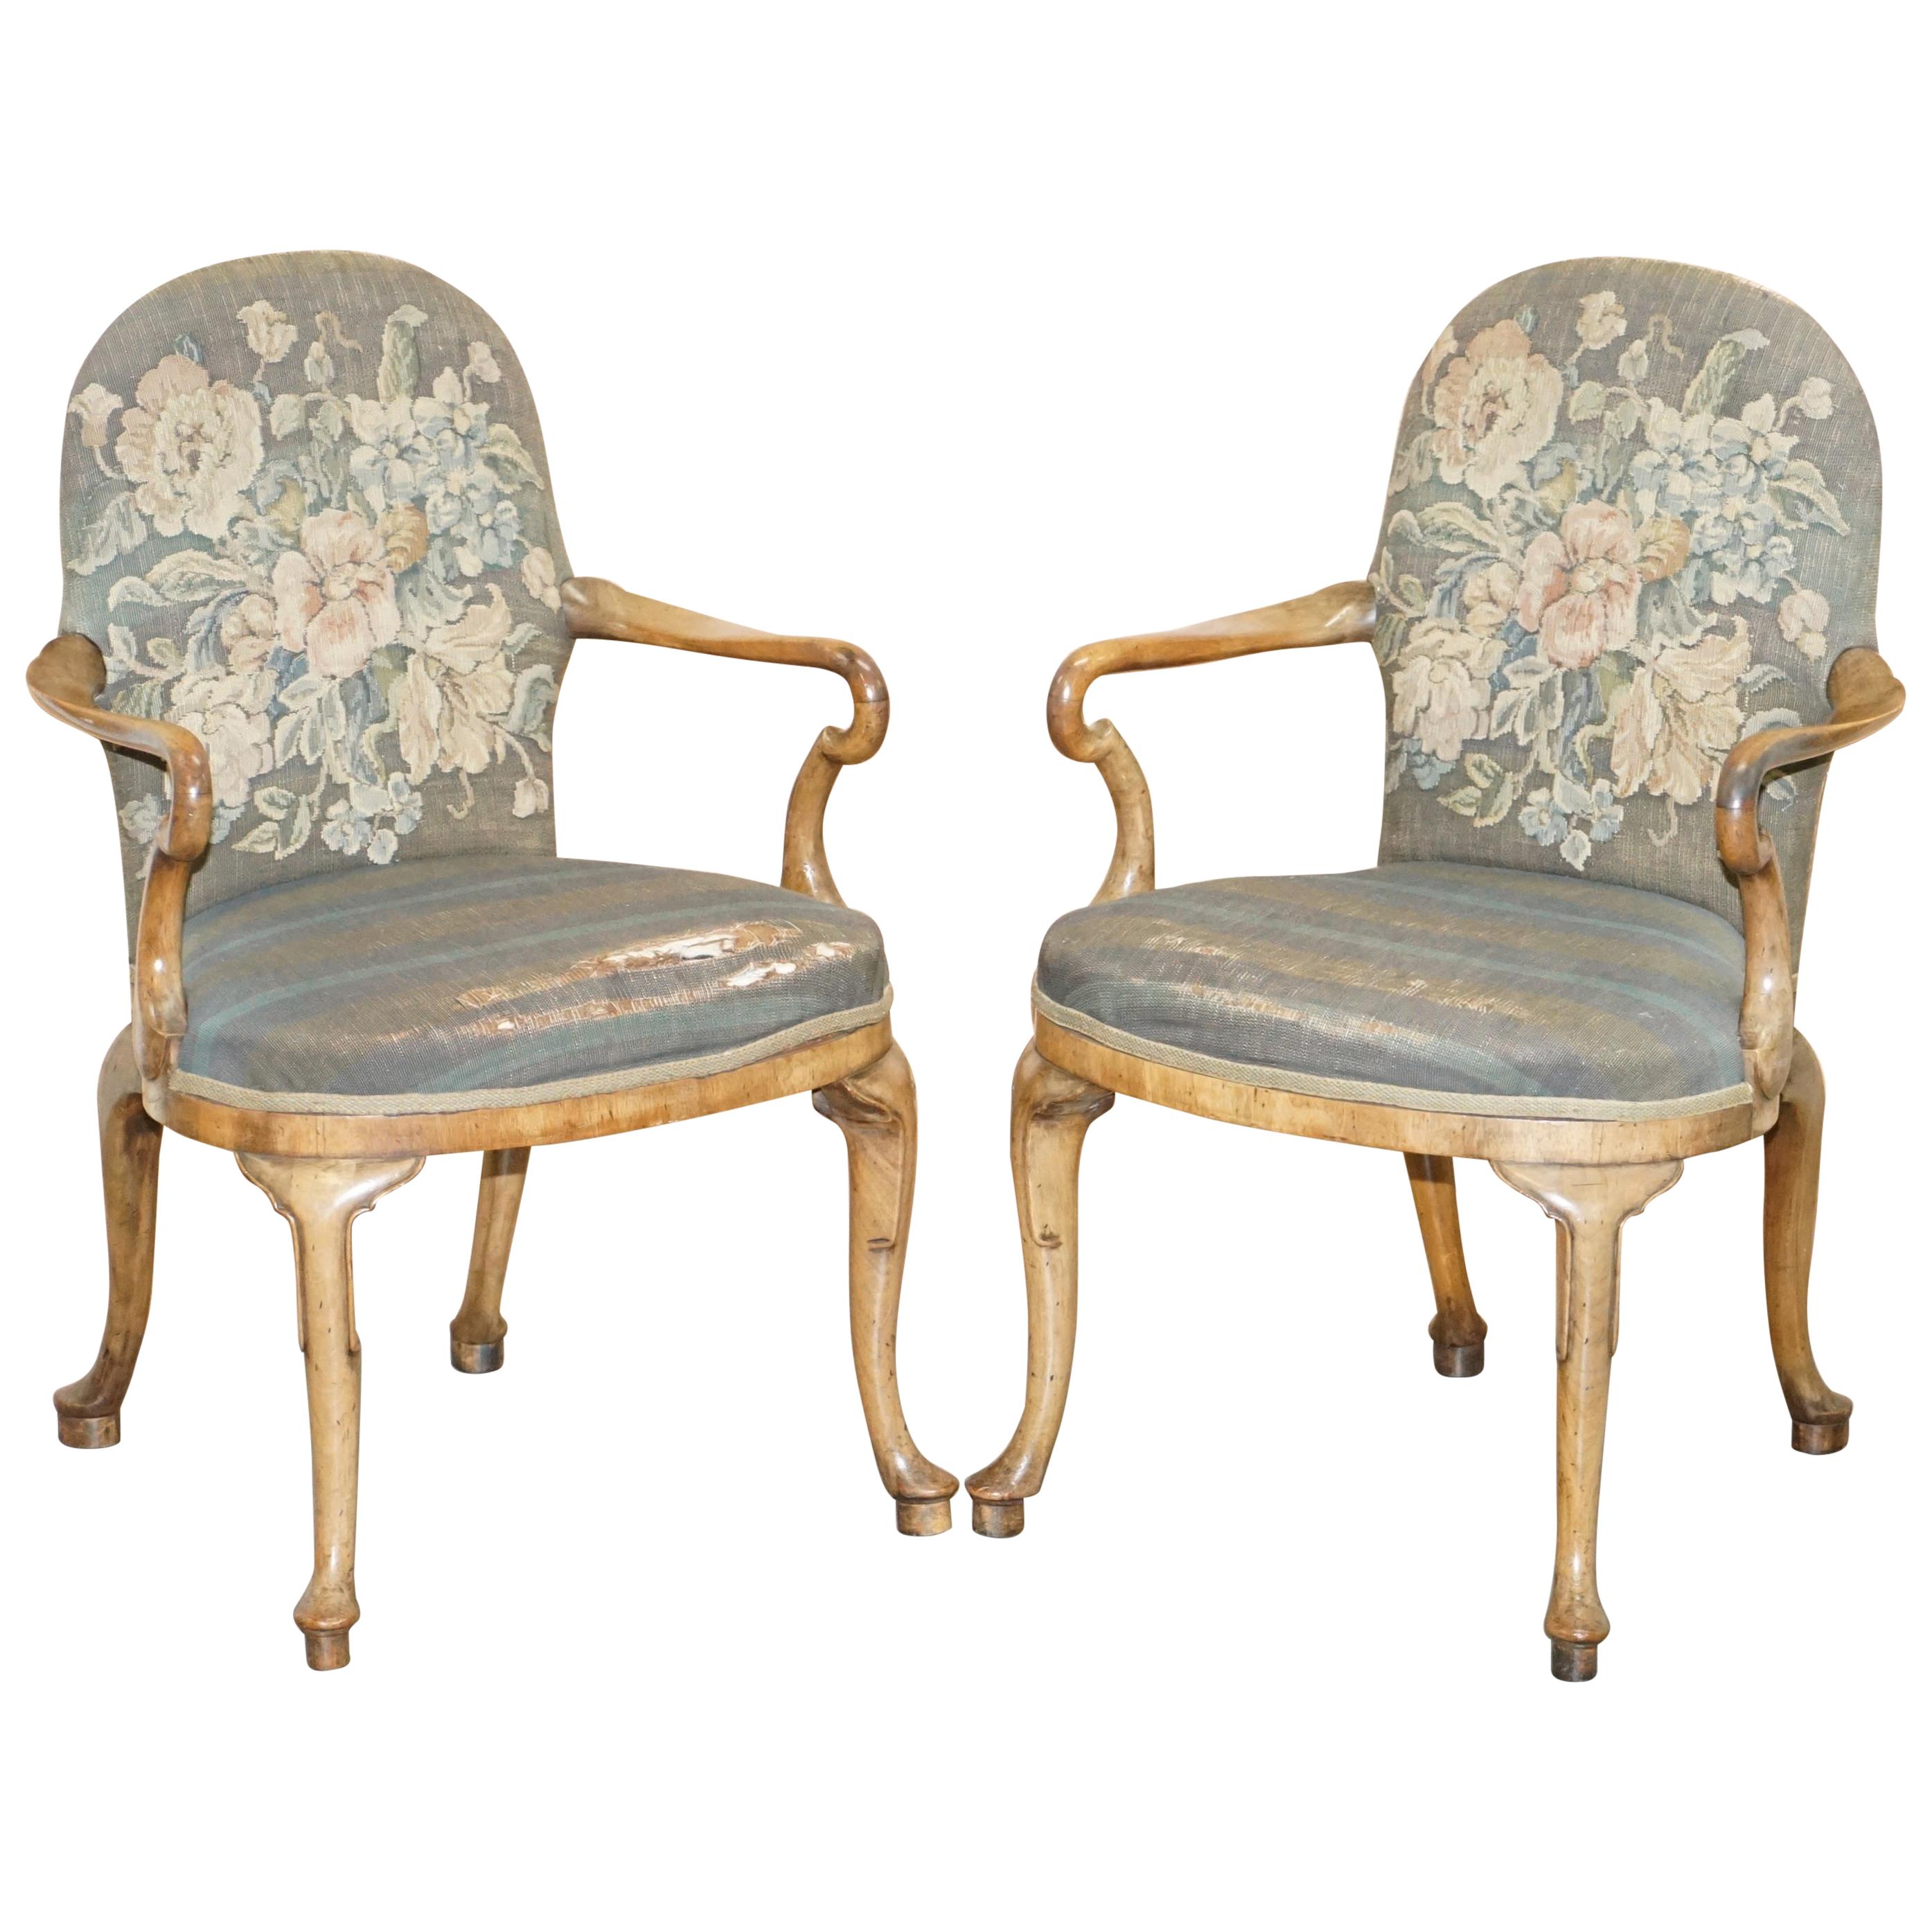 Sublime Pair of Early Victorian Original Upholstery English Walnut Armchairs